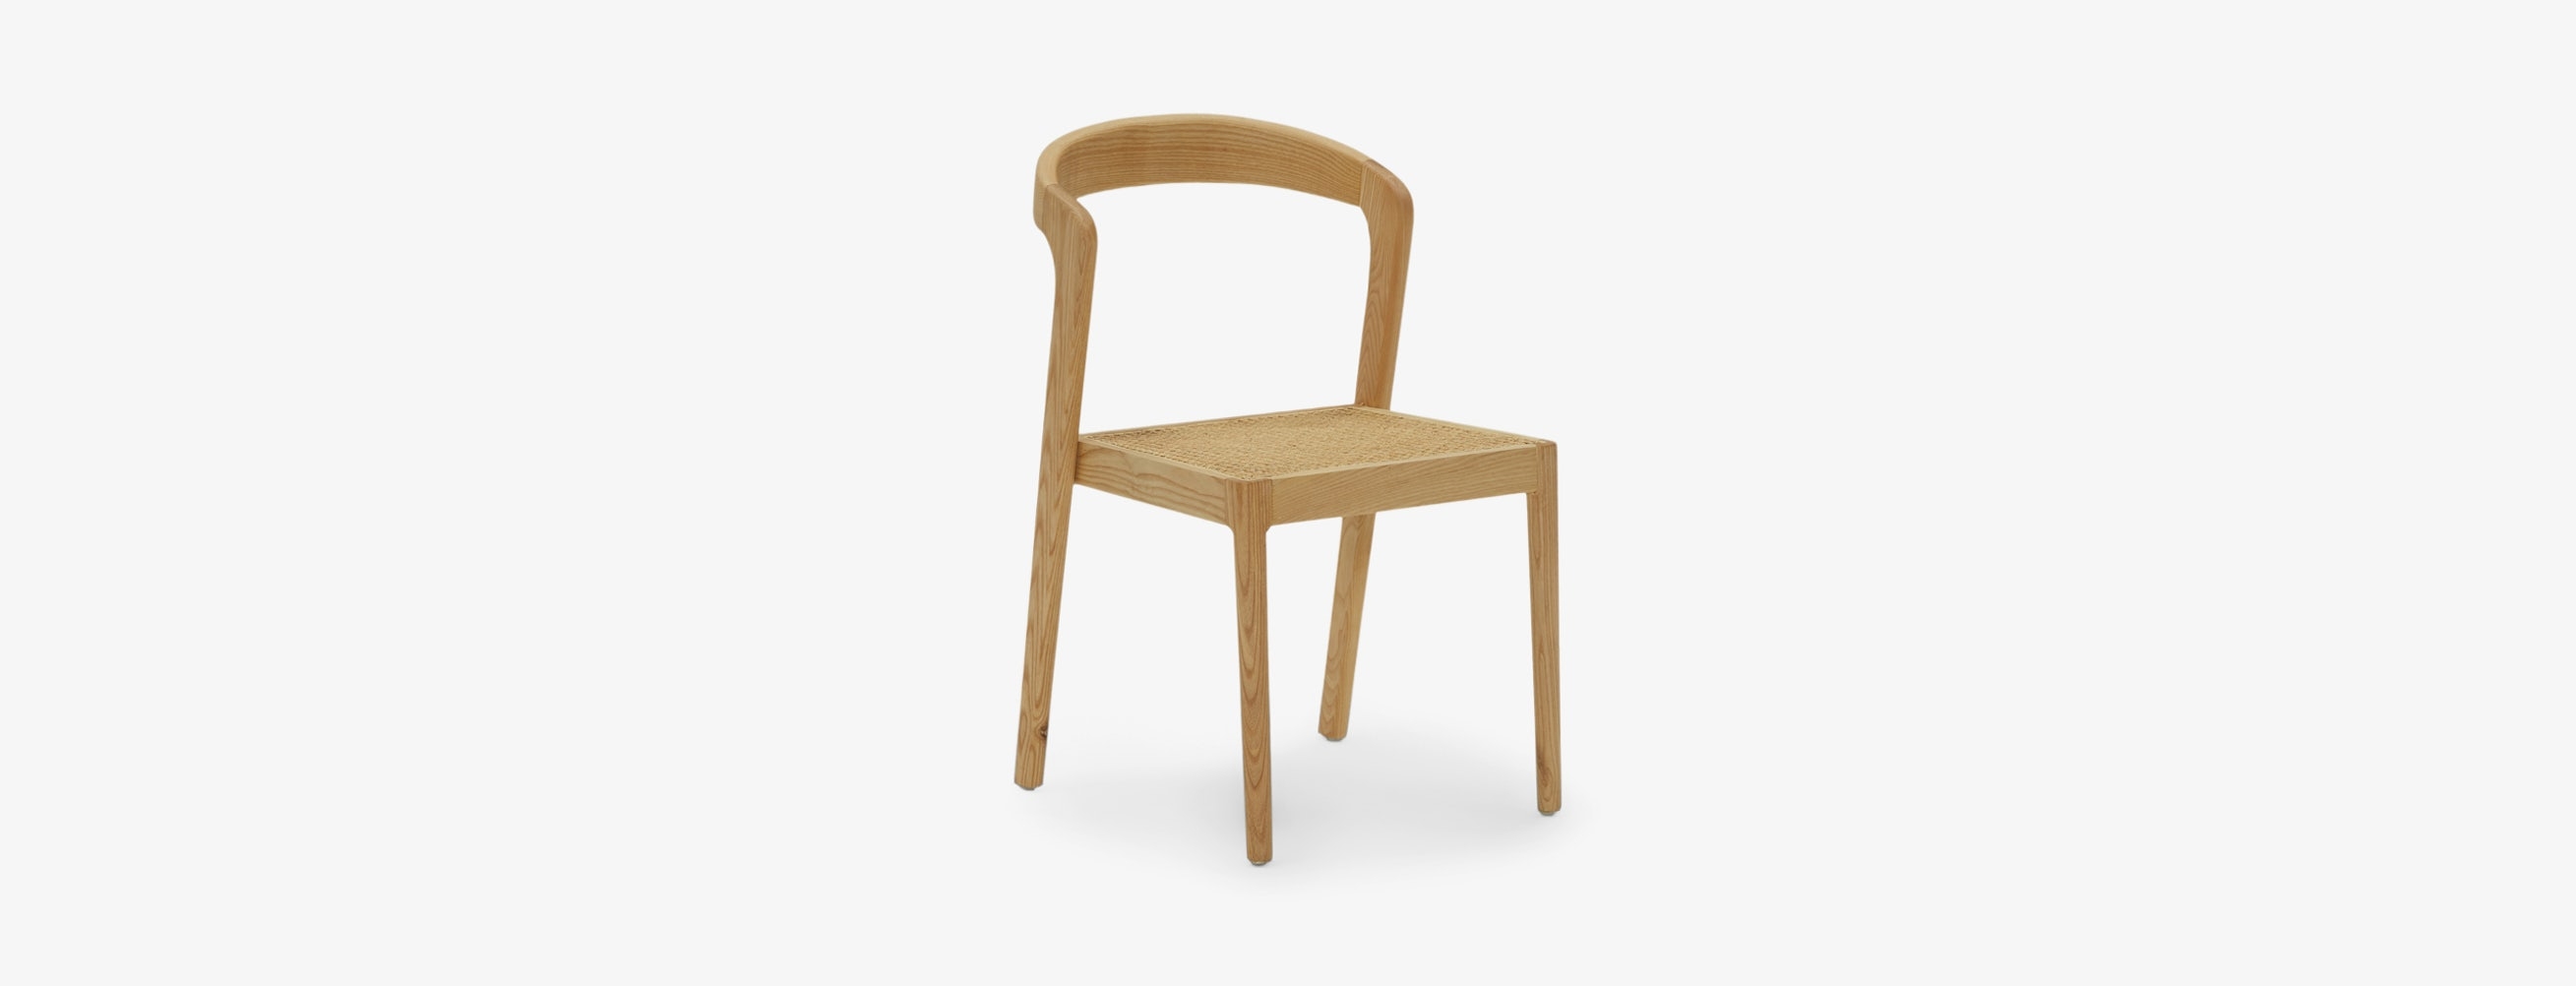 Elise Dining Chair - Image 0